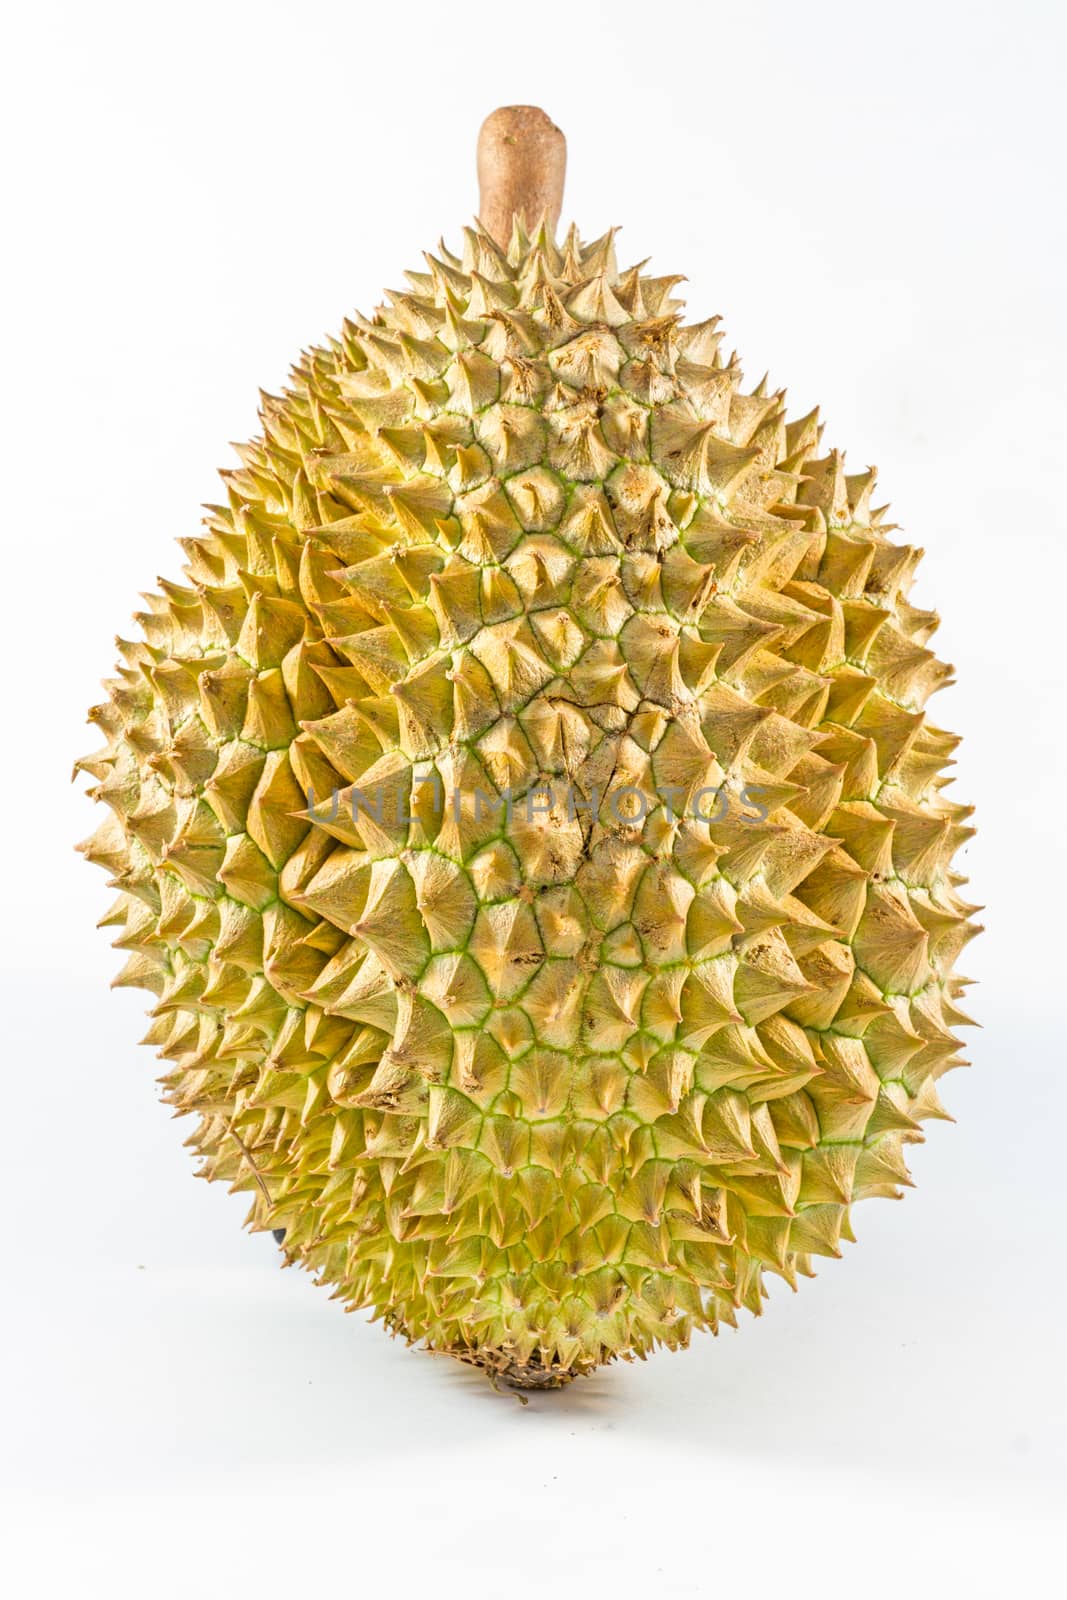 Durian fruit isolated on white background by ronnarong